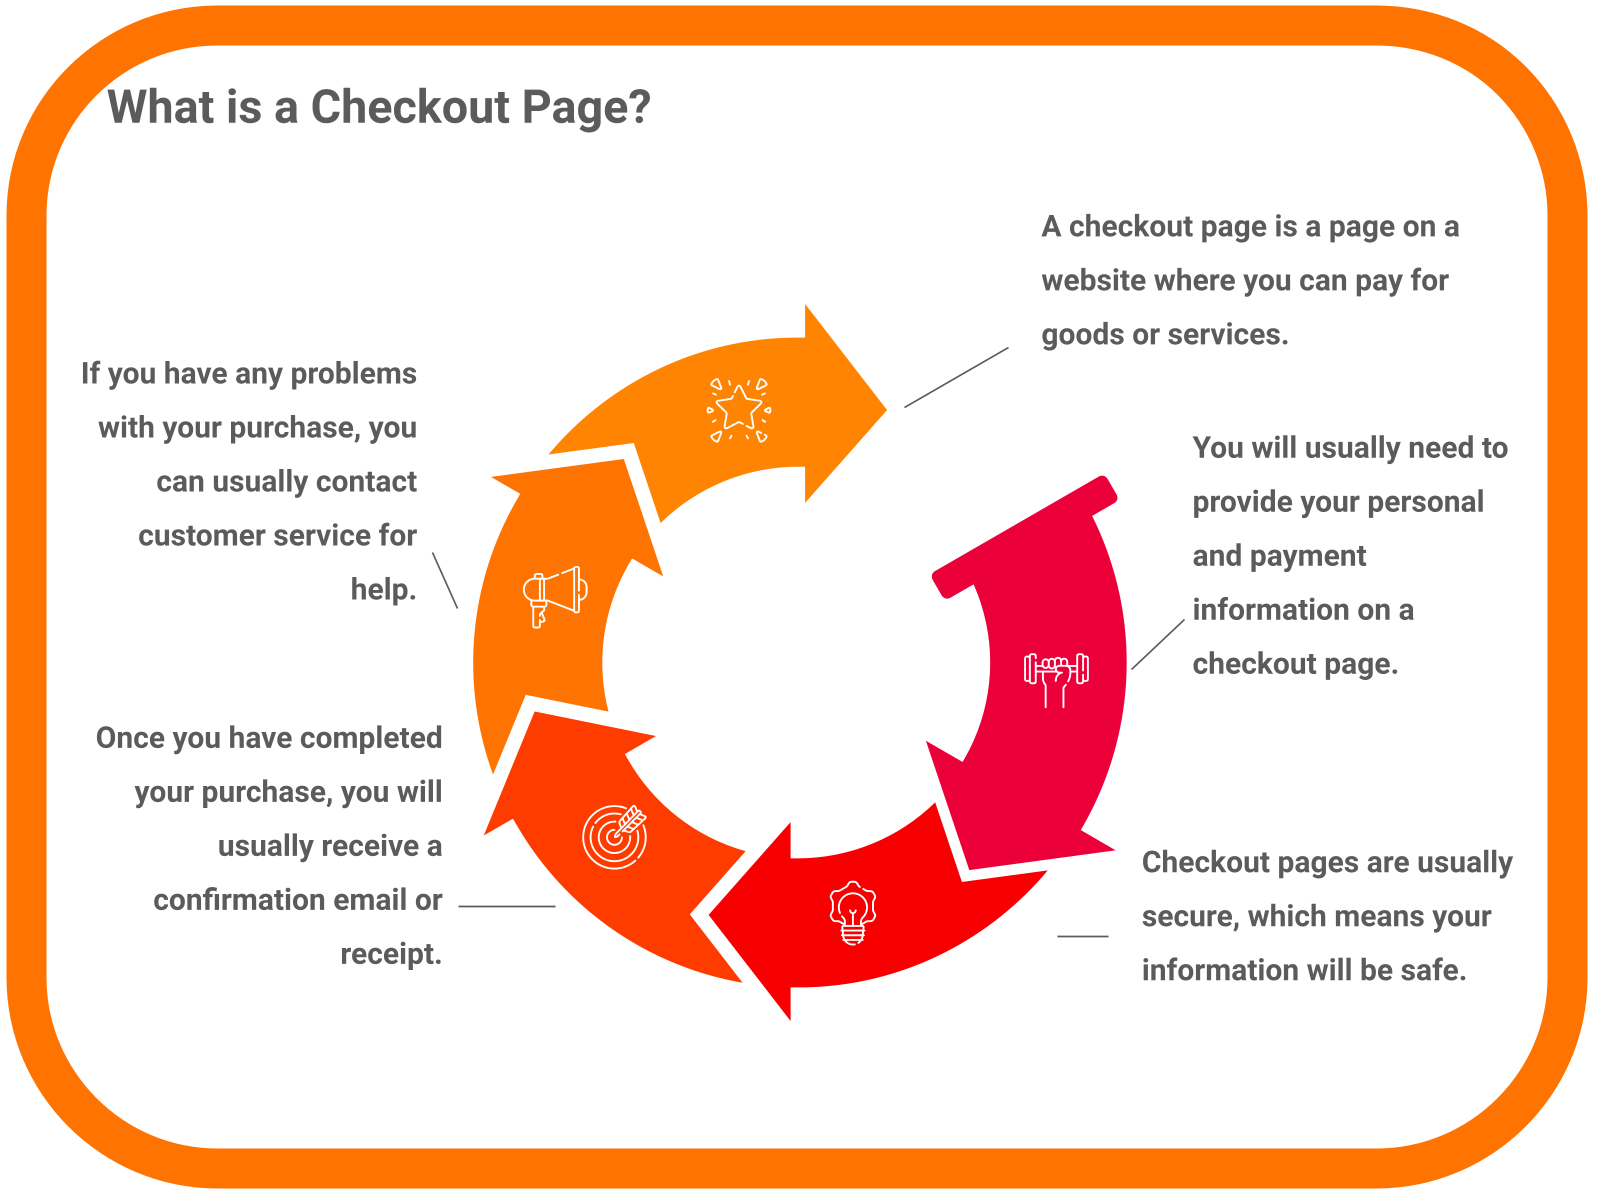 What is a Checkout Page?